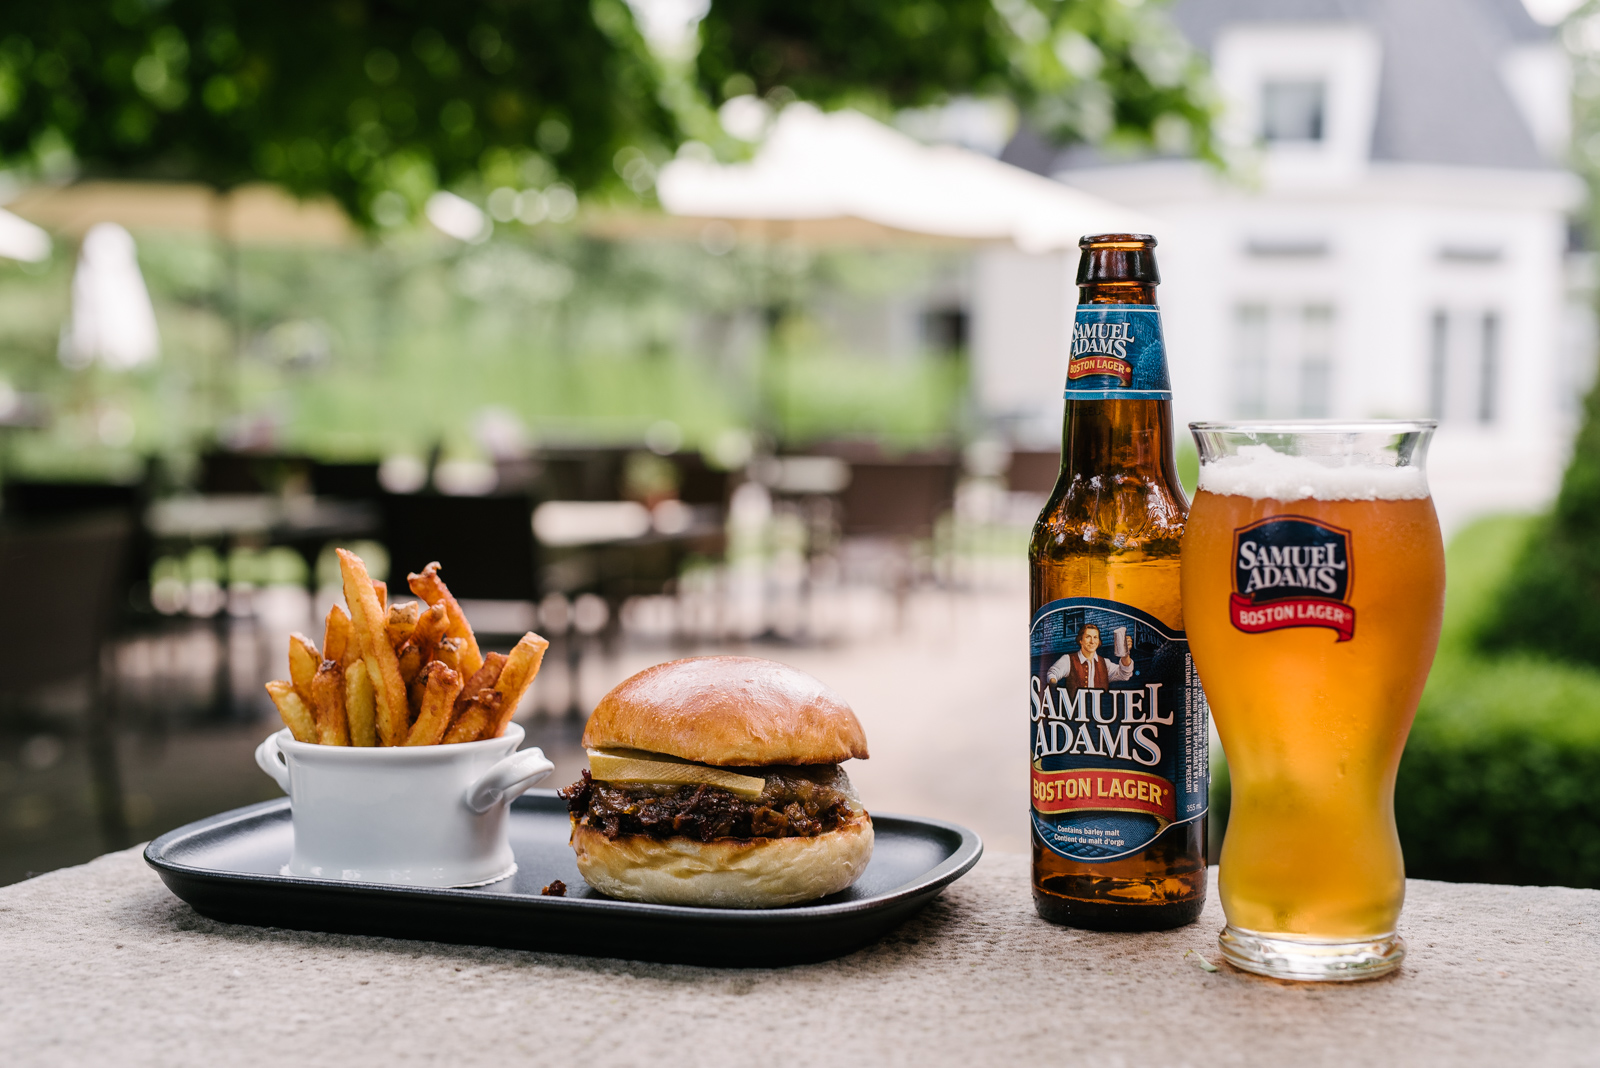 Burger and beer pairing